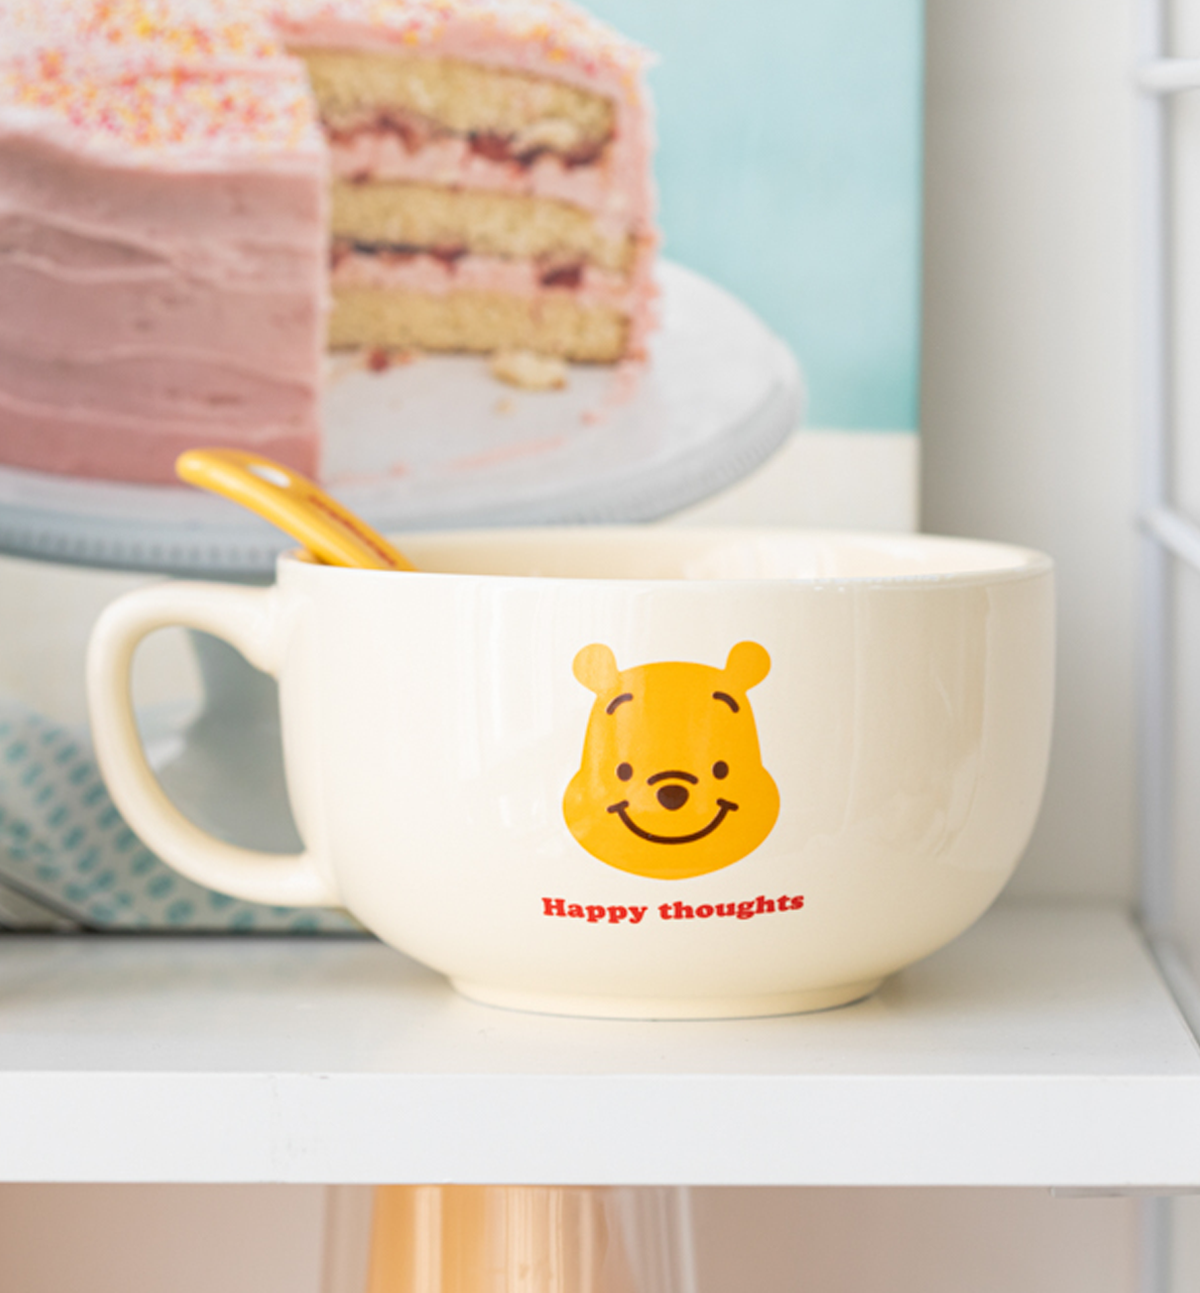 Winnie The Pooh Cereal Bowl + Spoon Set